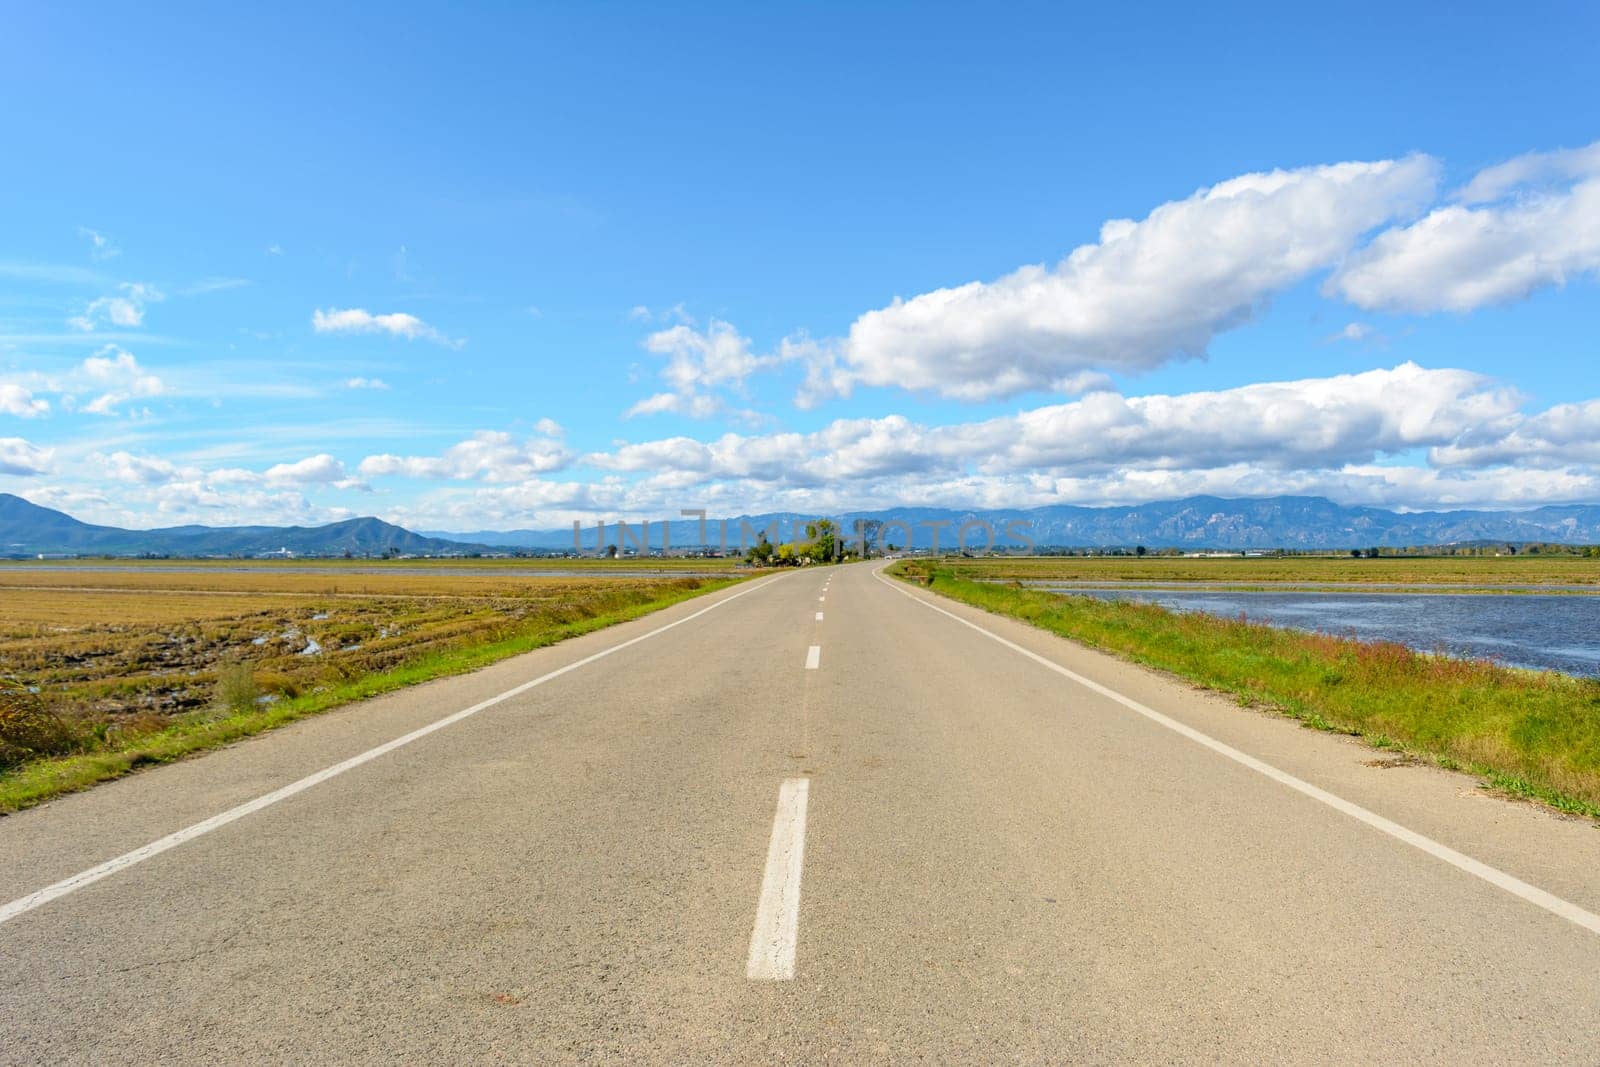 A straight road leading towards mountains under a bright blue sky with clouds, view of lonely road in the ebro delta, tarragona, catalonia, spain by carlosviv